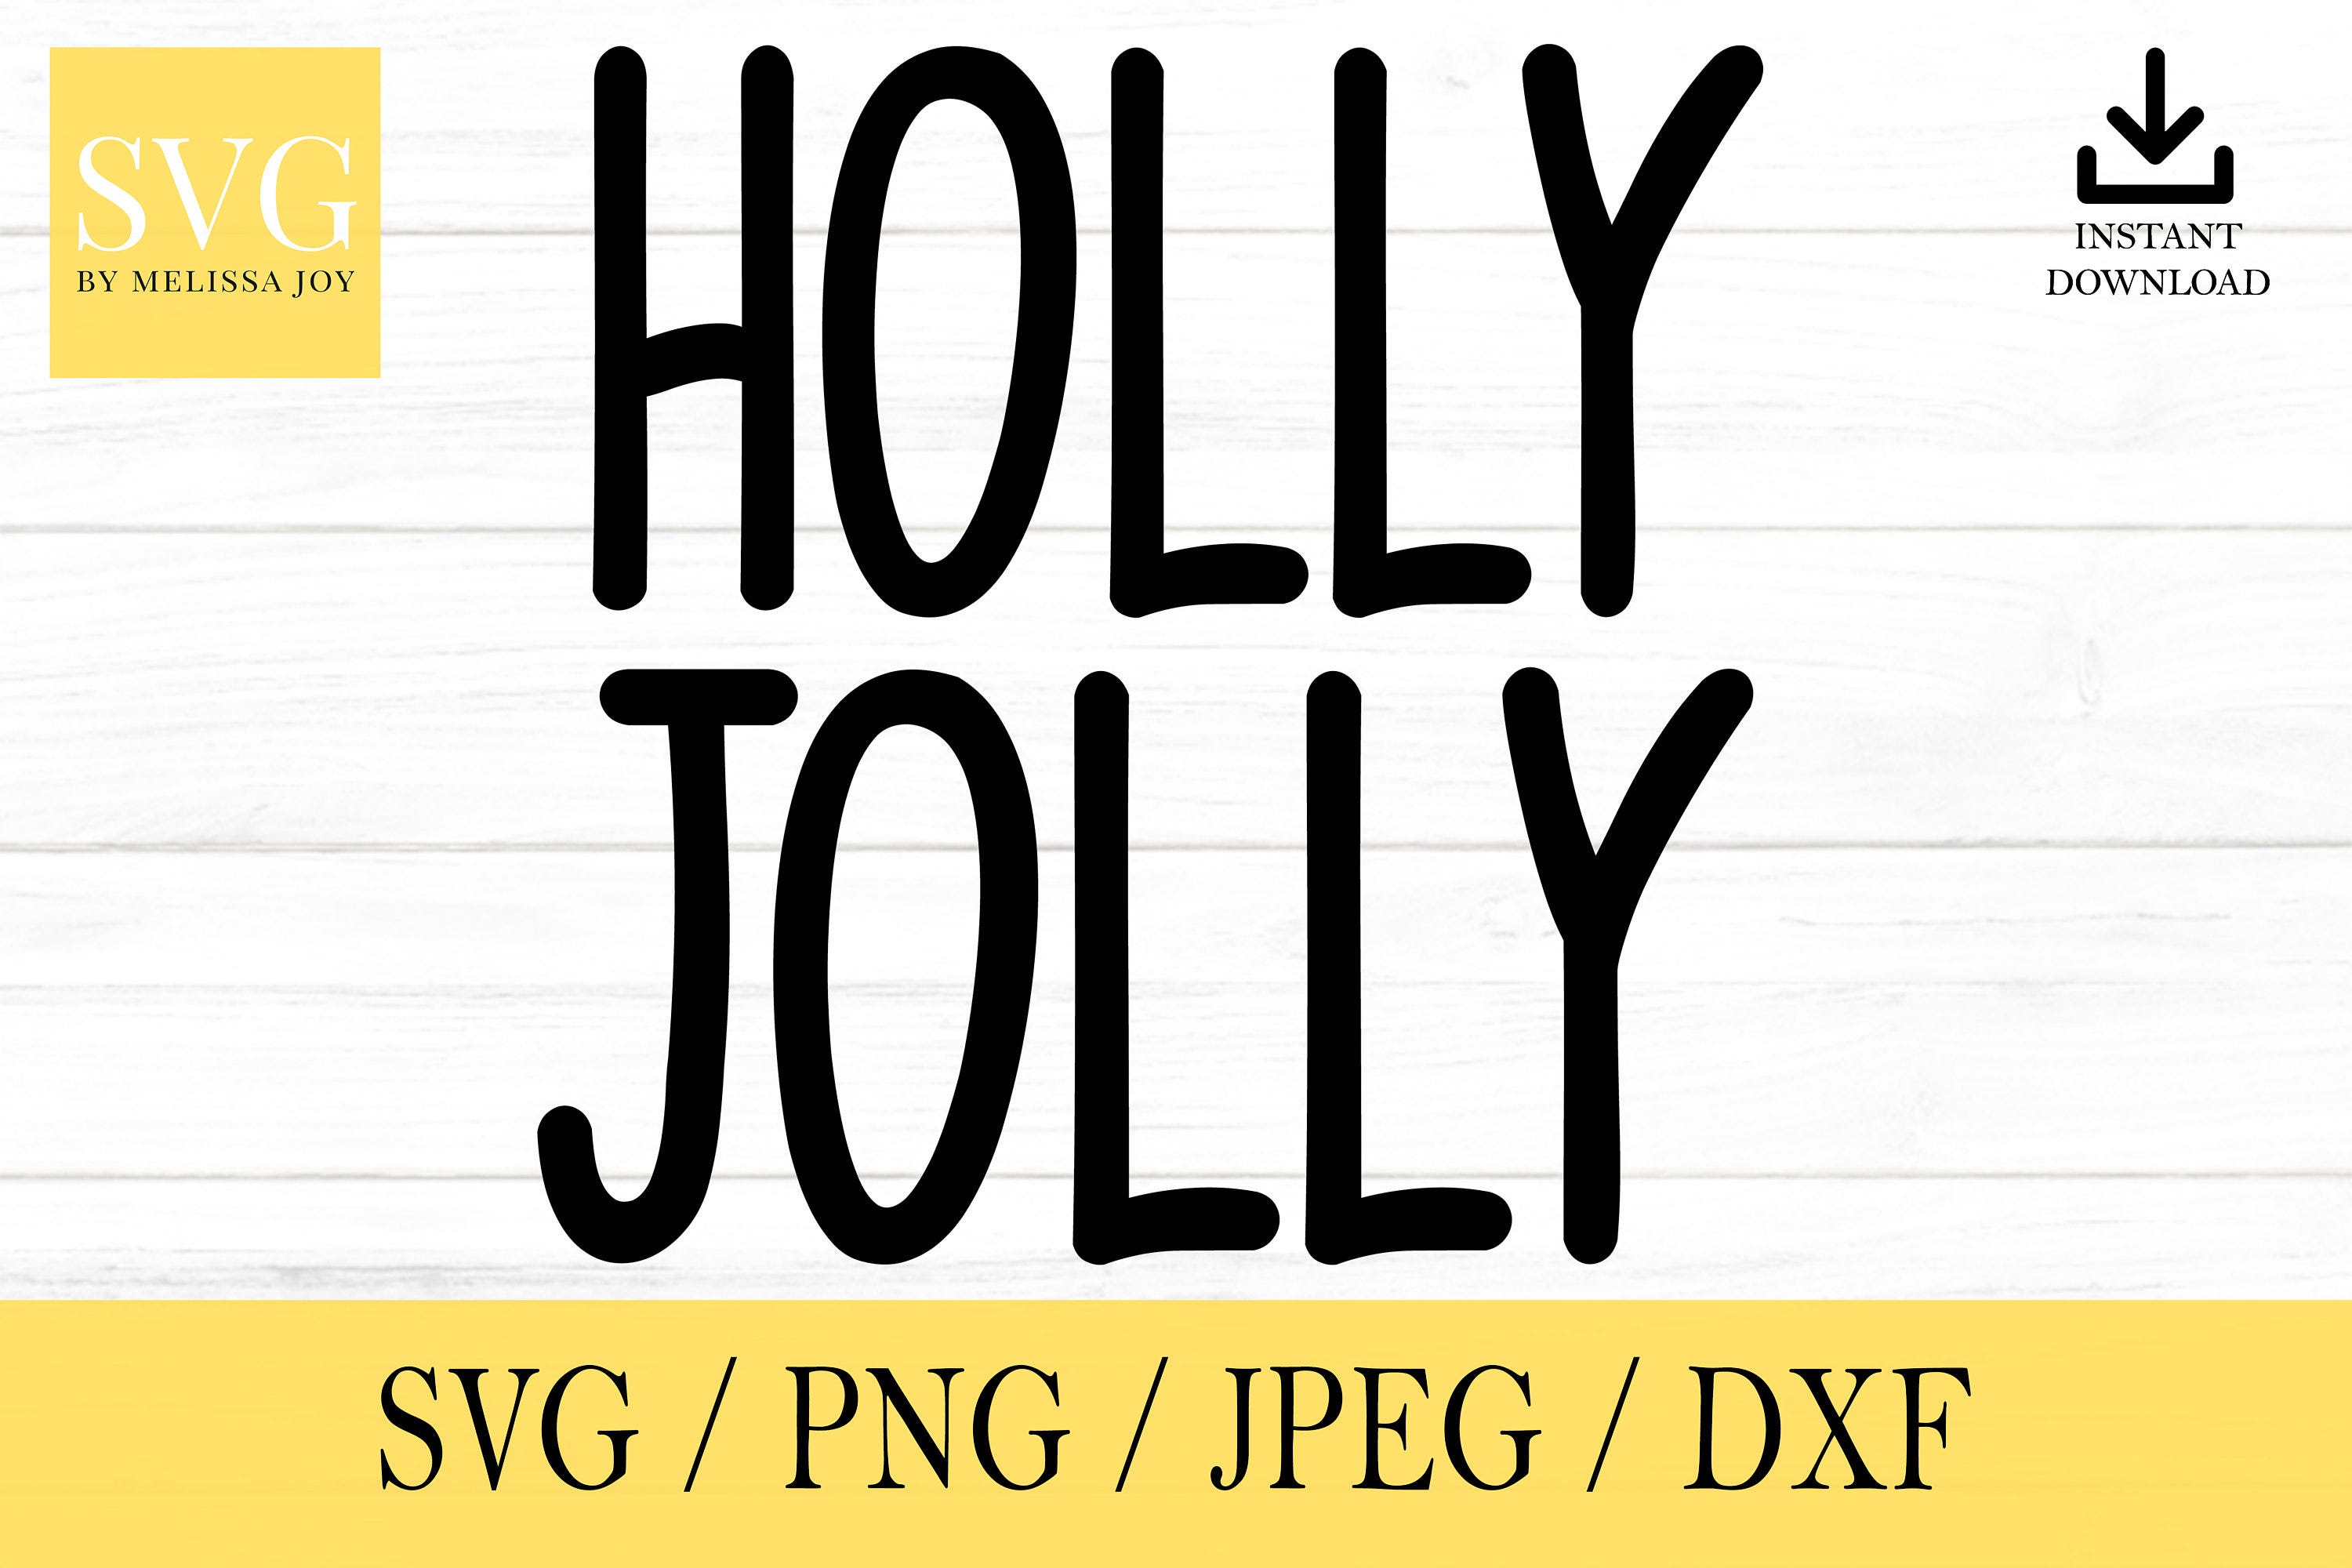 Holly Jolly svg, Holiday SVG, svg, png, dxf, jpeg, Digital Download, Cut File, Cricut, Silhouette, Glowforge, Svg files for cricut